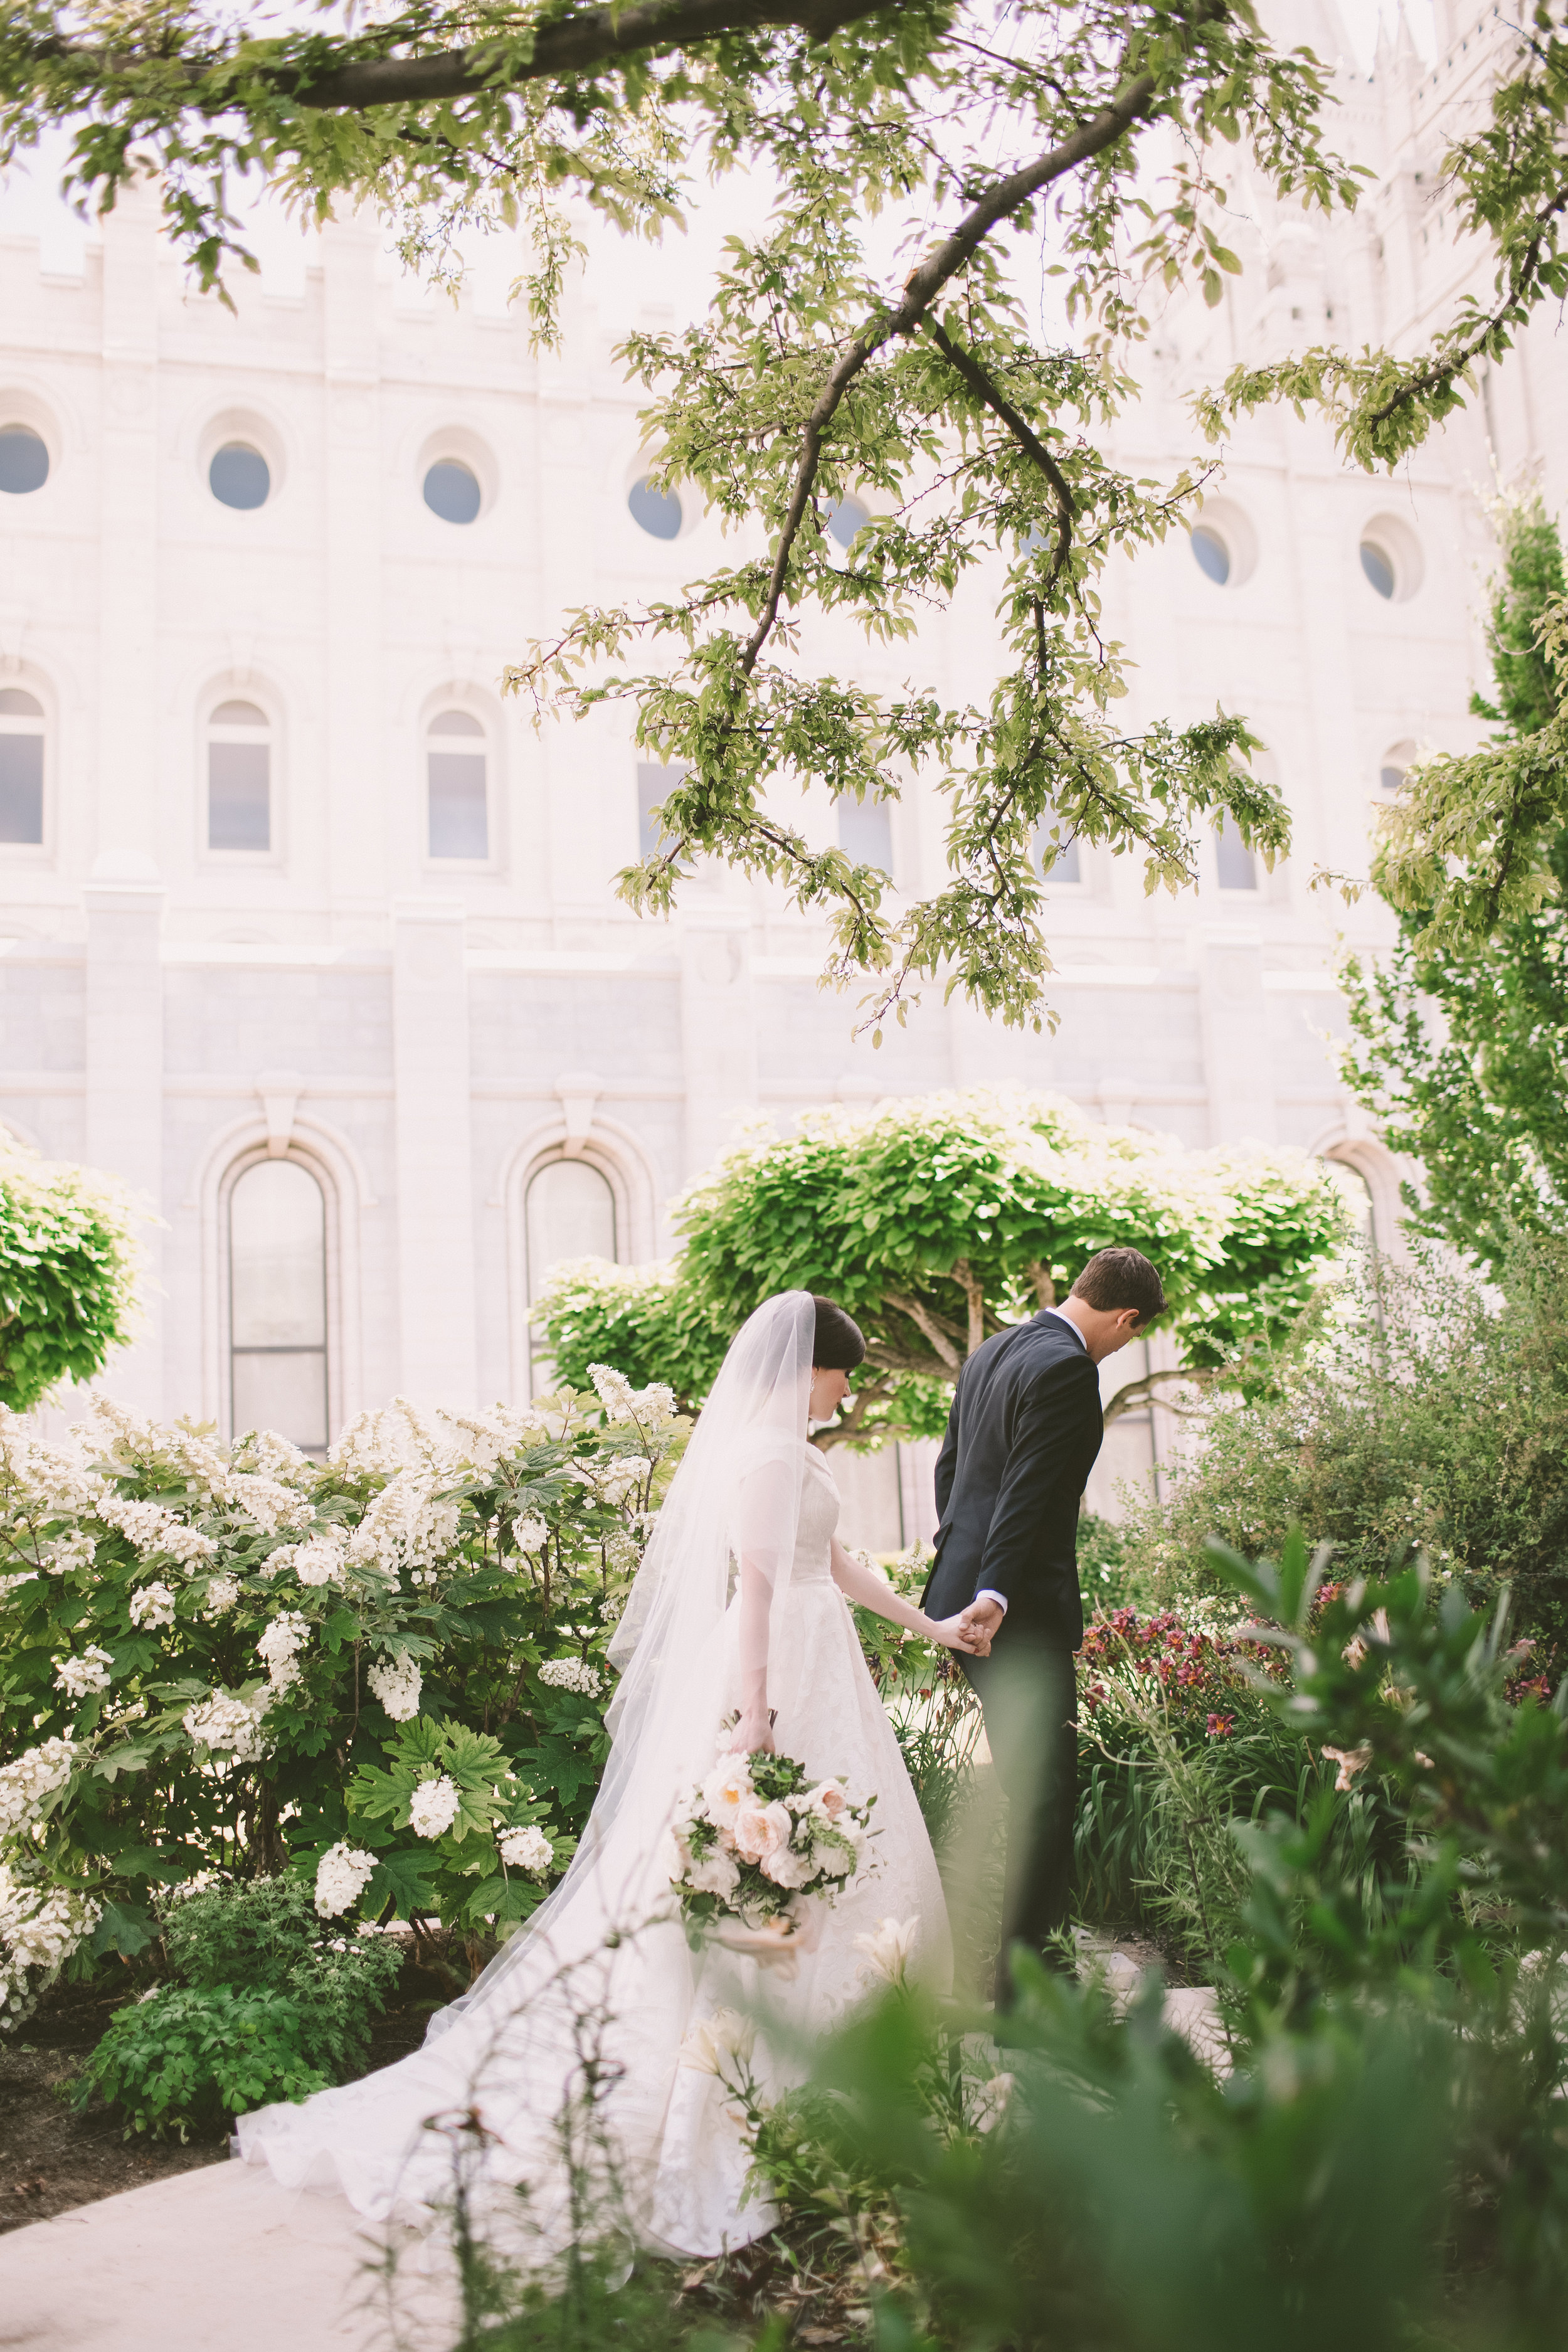 Utah State Capitol Wedding | Colorful Summer Wedding | Michelle Leo Events | Utah Event Planner and Designer | Jessica Janae Photography